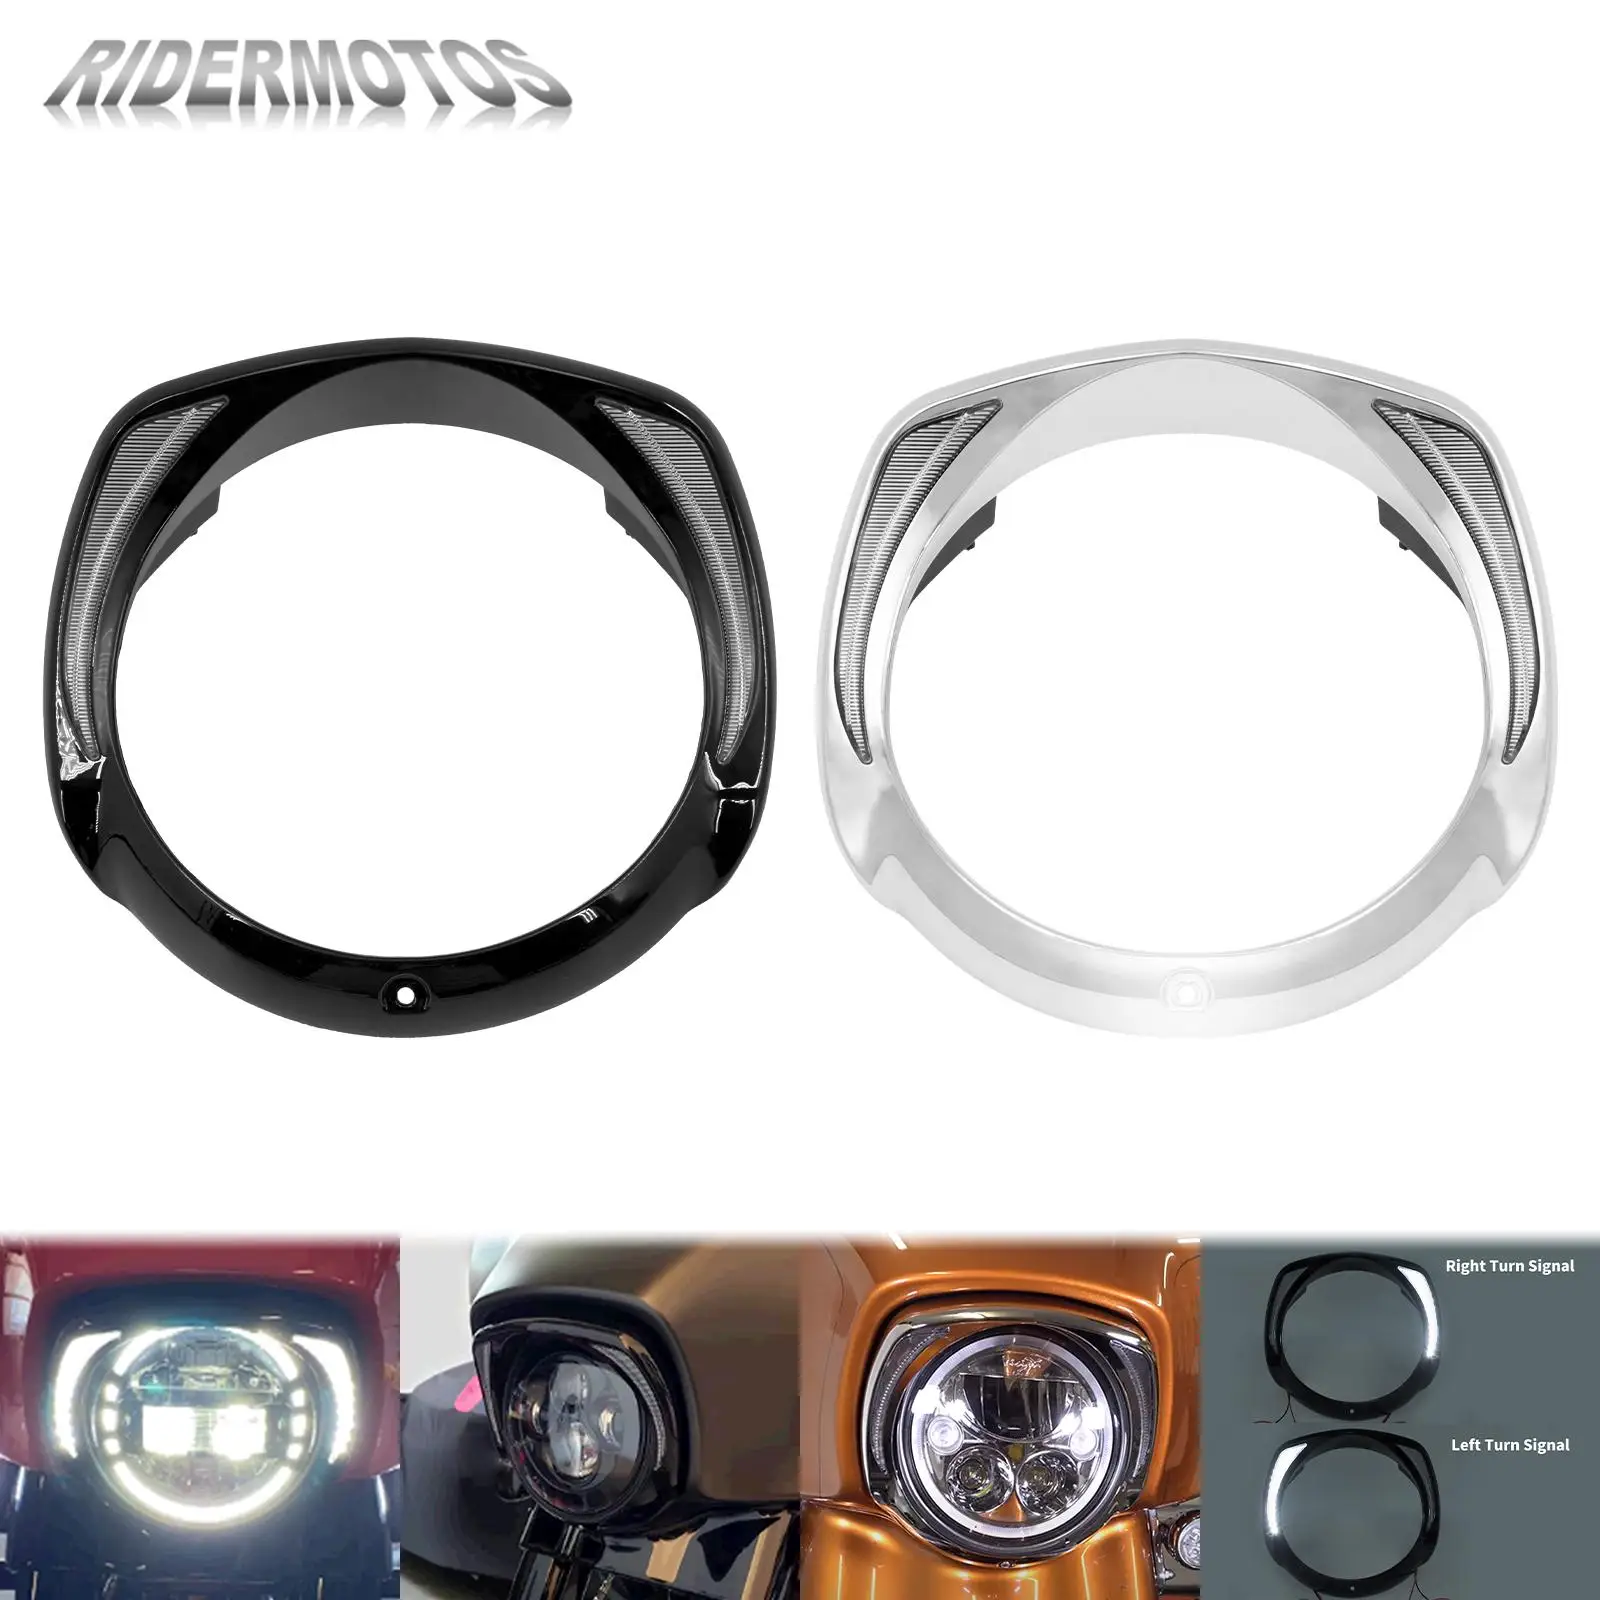 

Motorcycle 7-Inch Headlight Bezel Trim Ring For Harley Touring Street Glide Road King Electra Tri Glide FLHR FLHX FLTXR 2014-Up